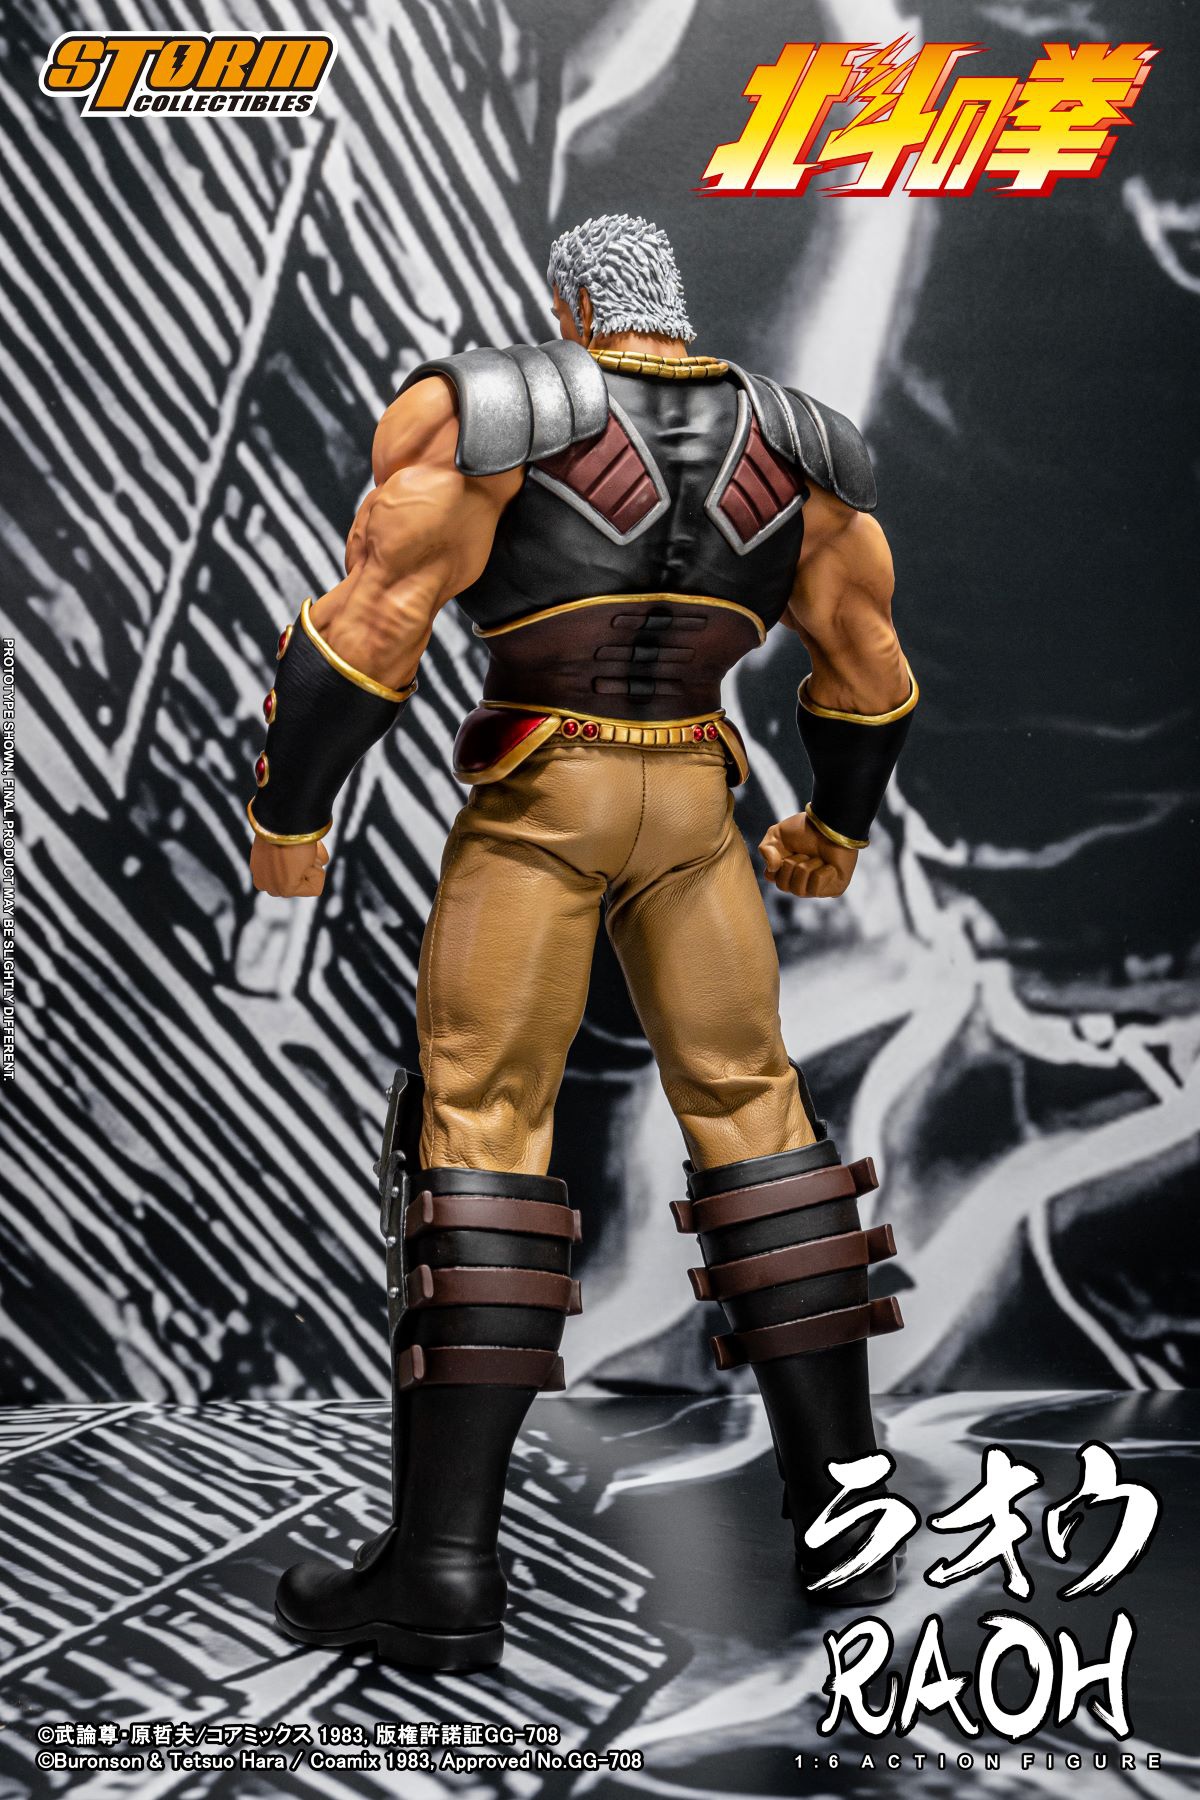 martialarts - NEW PRODUCT: Storm Collectibles - "Fist of the North Star" RAOH 04139